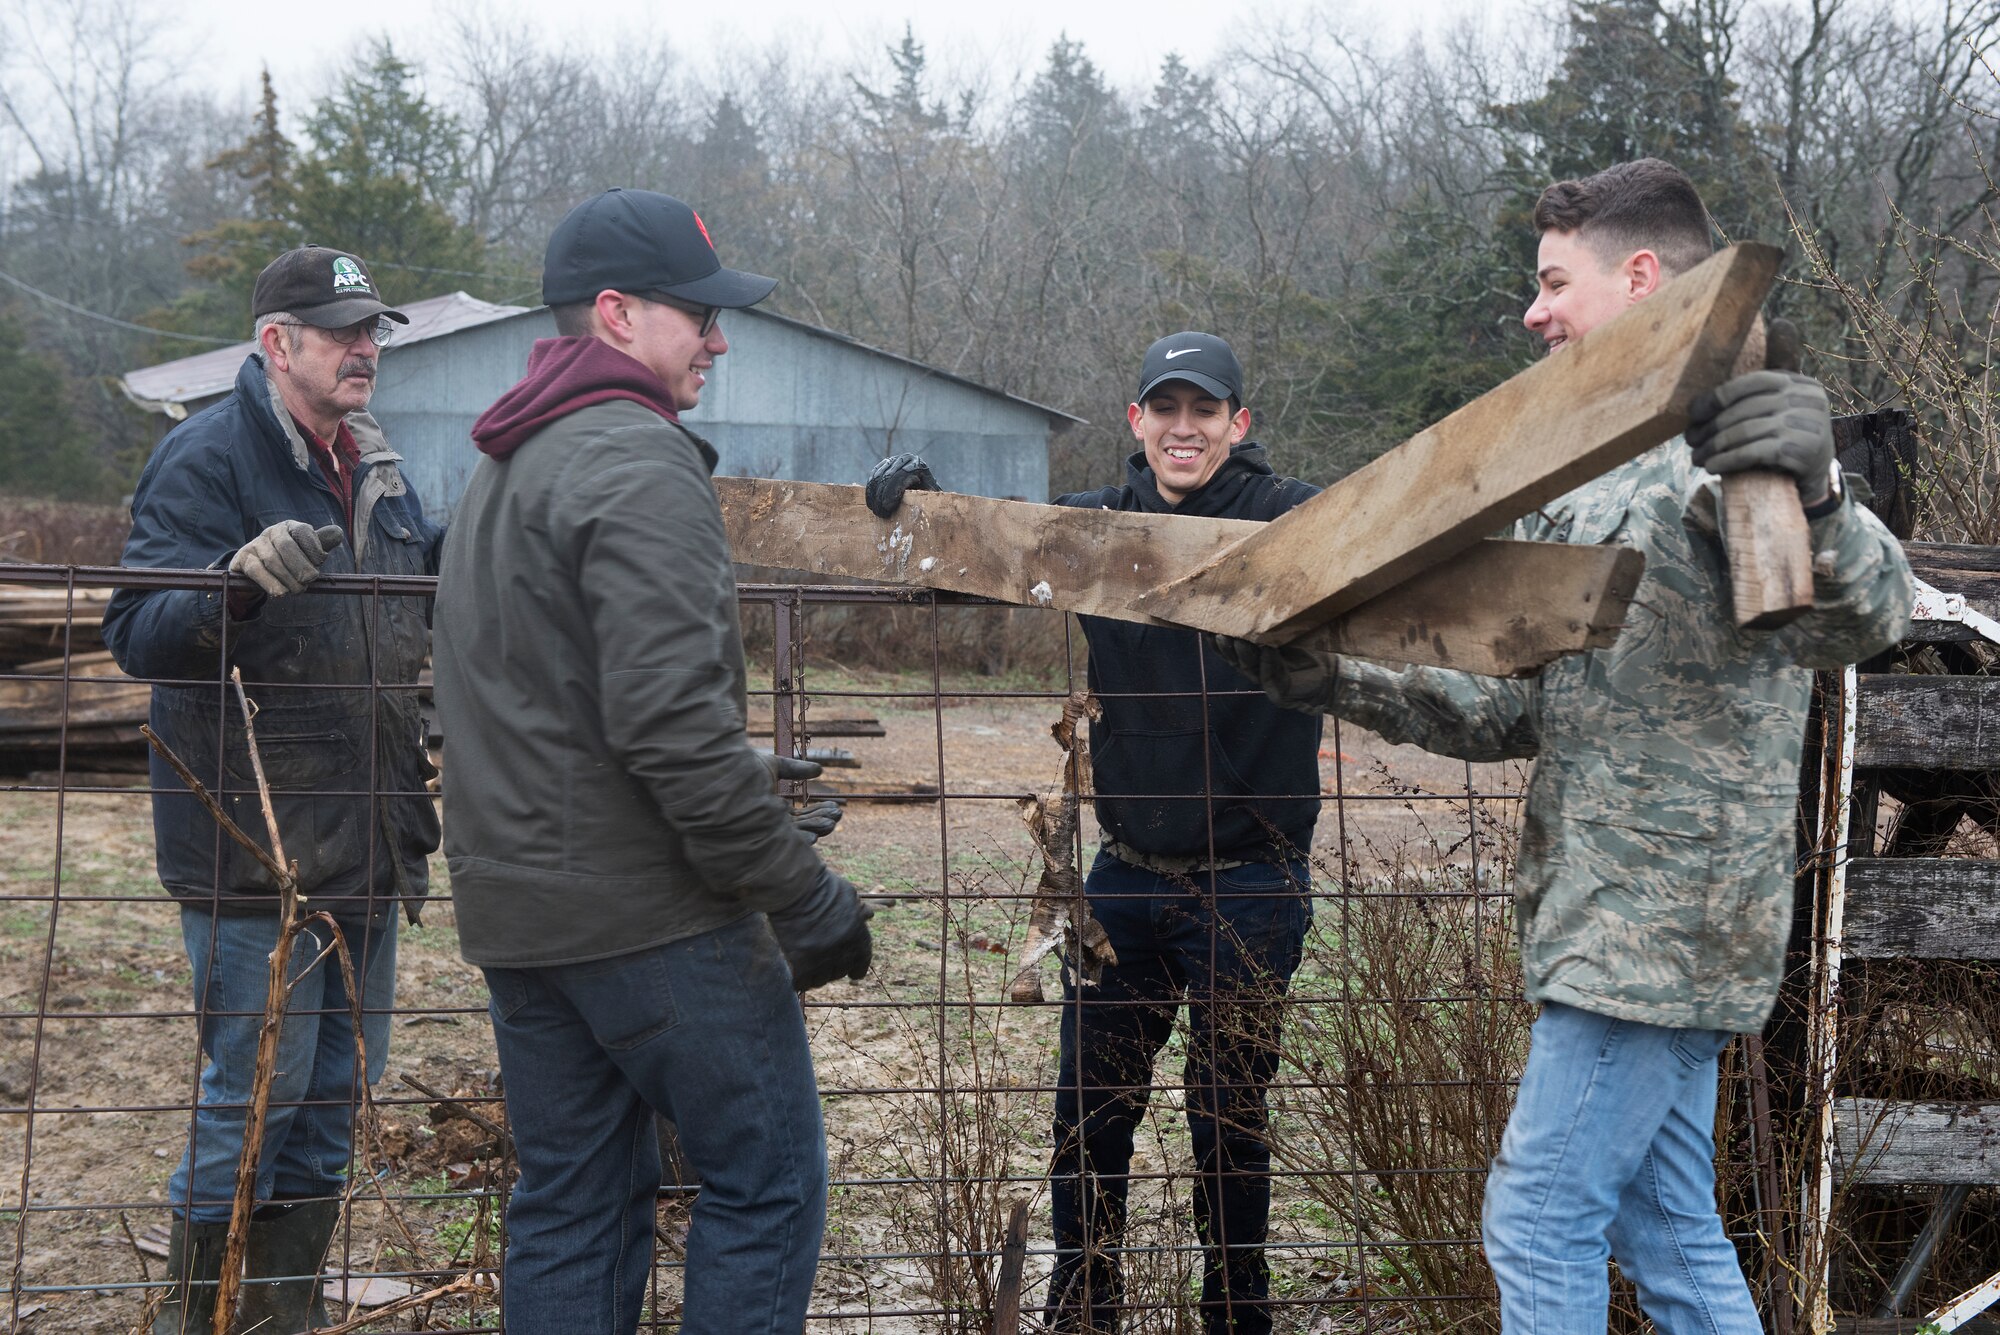 Members of the 509th SFS, led by 509th Mission Support Group Commander Christopher Callis, volunteered their time to help local Vietnam War veteran and former security policeman Todd Conner clear parts of his property.